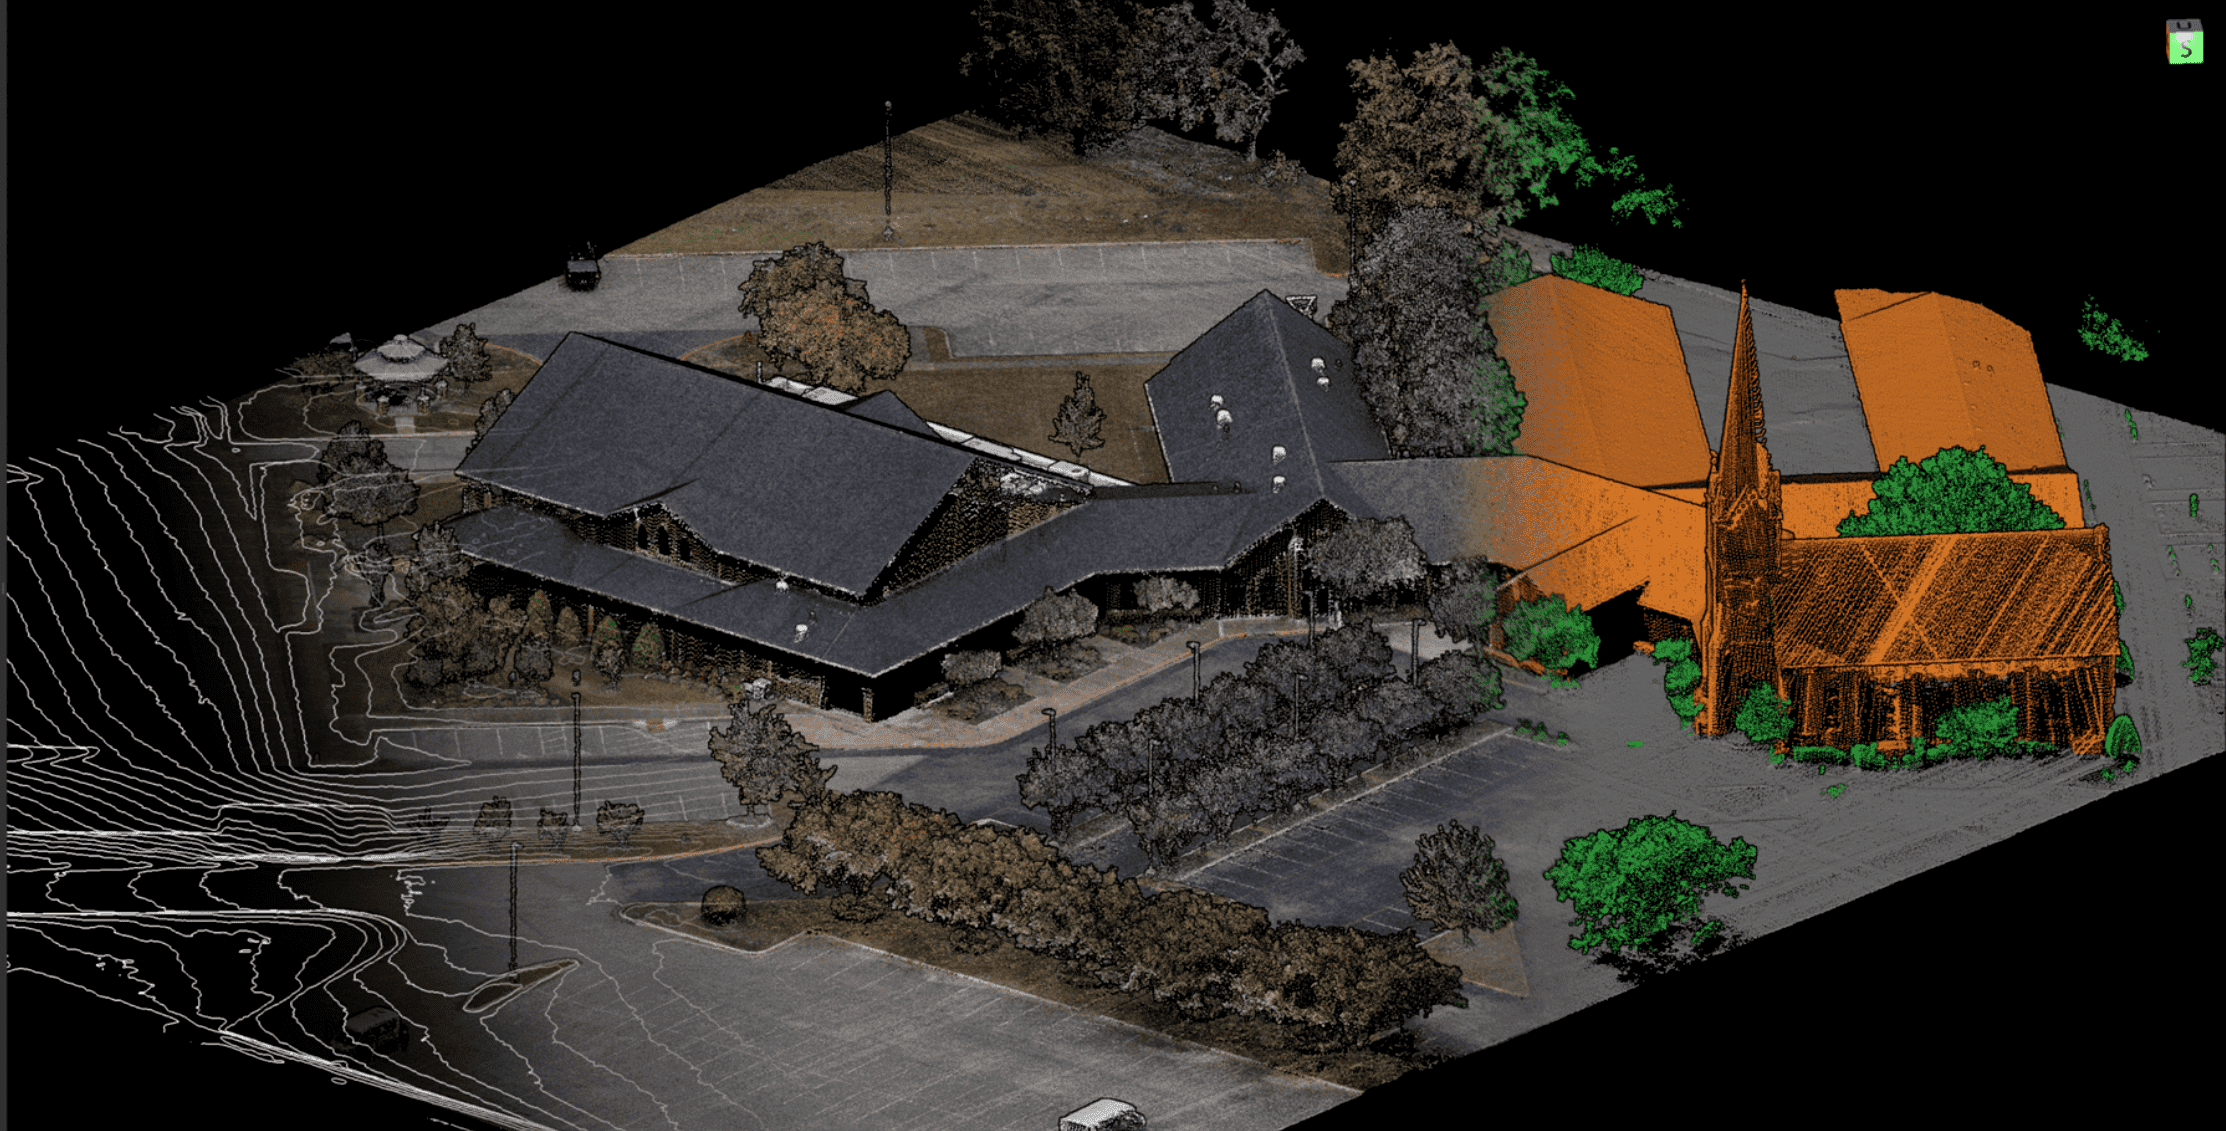 LiDAR mapping solutions - Custom 3D Mapping Solutions